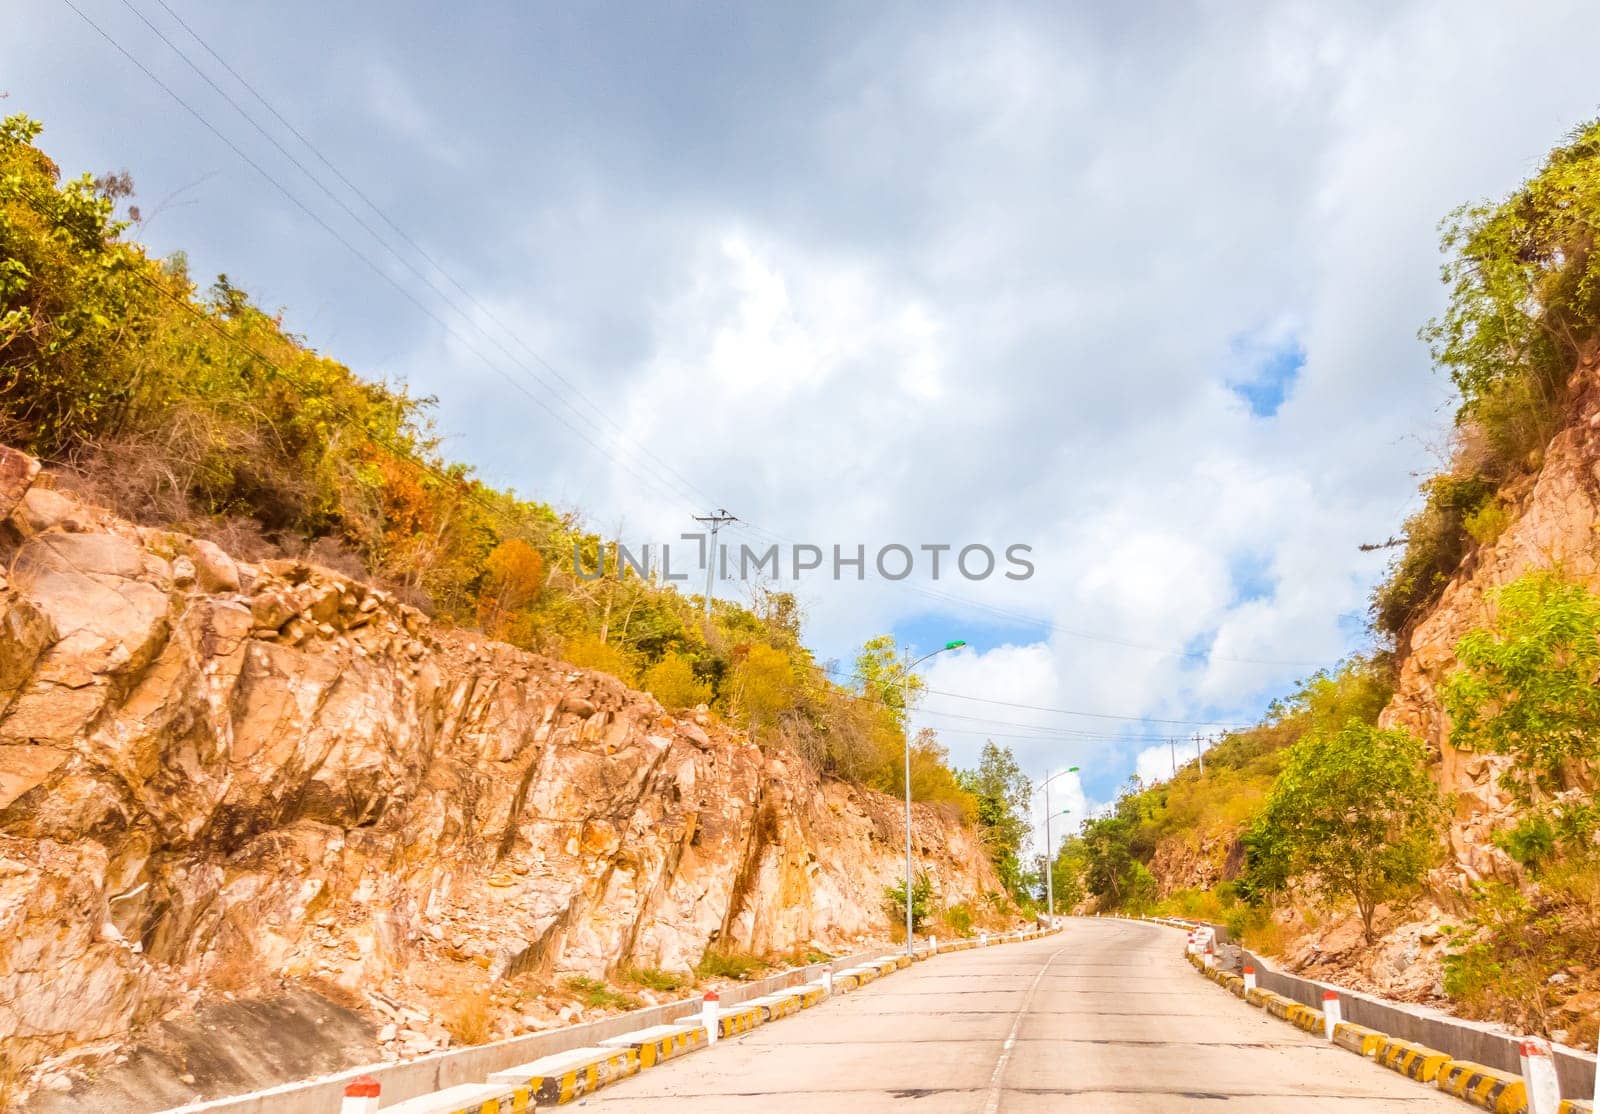 Bright sunshine day time Highway curve road overpass nature landscape background street tall lanterns trees bushes sideway.